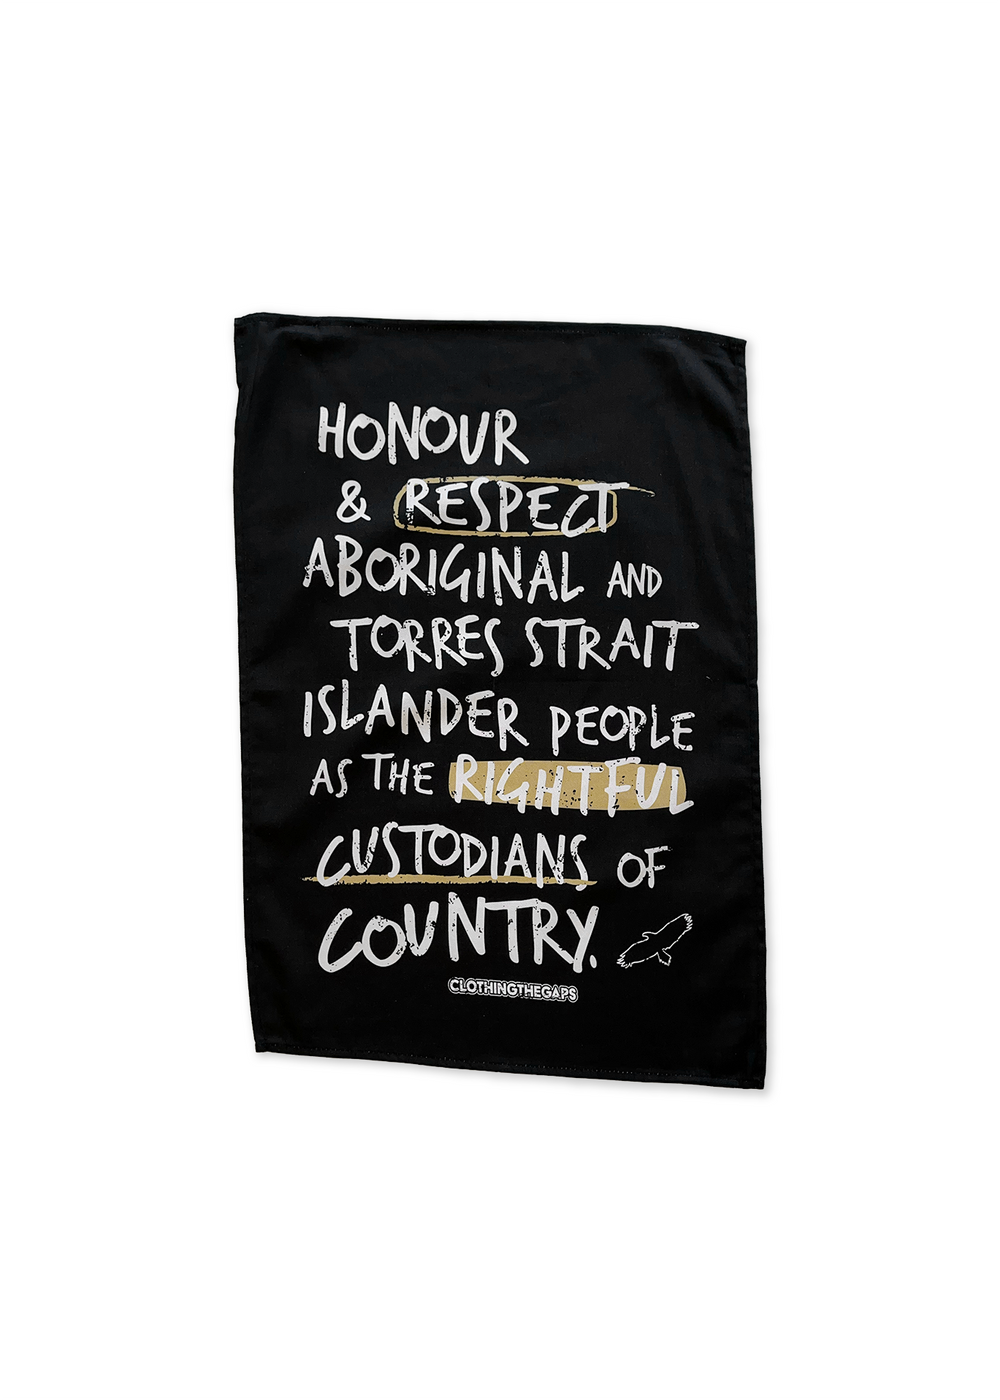 Clothing The Gaps. Honour Country Tea Towel 2 Pack. Tea towel 1 black background with white hand-writen style text 'Honour and respect Aboriginal and Torres Strait Islander people as the rightful custodians of country.' Circling 'respect' underlining 'custodians' and highlighting 'rightful' in a sand yellow colour. Outlined 'bunjil' eagle in  corner.' Tea towel 2 has black background with a sand coloured outlined Decolonised map of Australia and phrase ‘Honour Country’ in big handwritten white text.